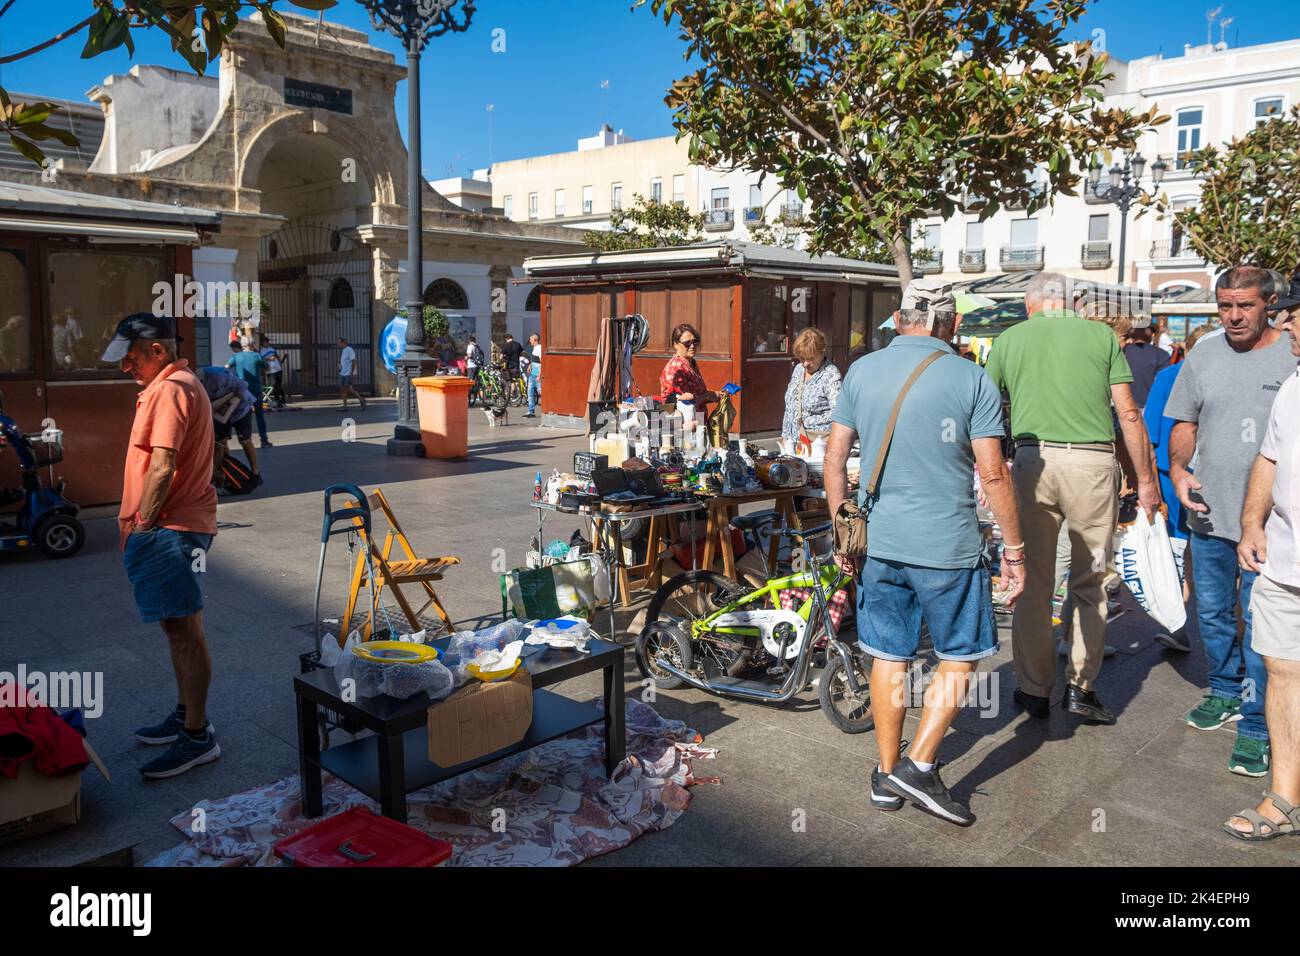 Flea market in the streets located in the old town part of Cadiz, Spain. Vendors selling secondhand antiques & collectables to curious tourists. Stock Photo